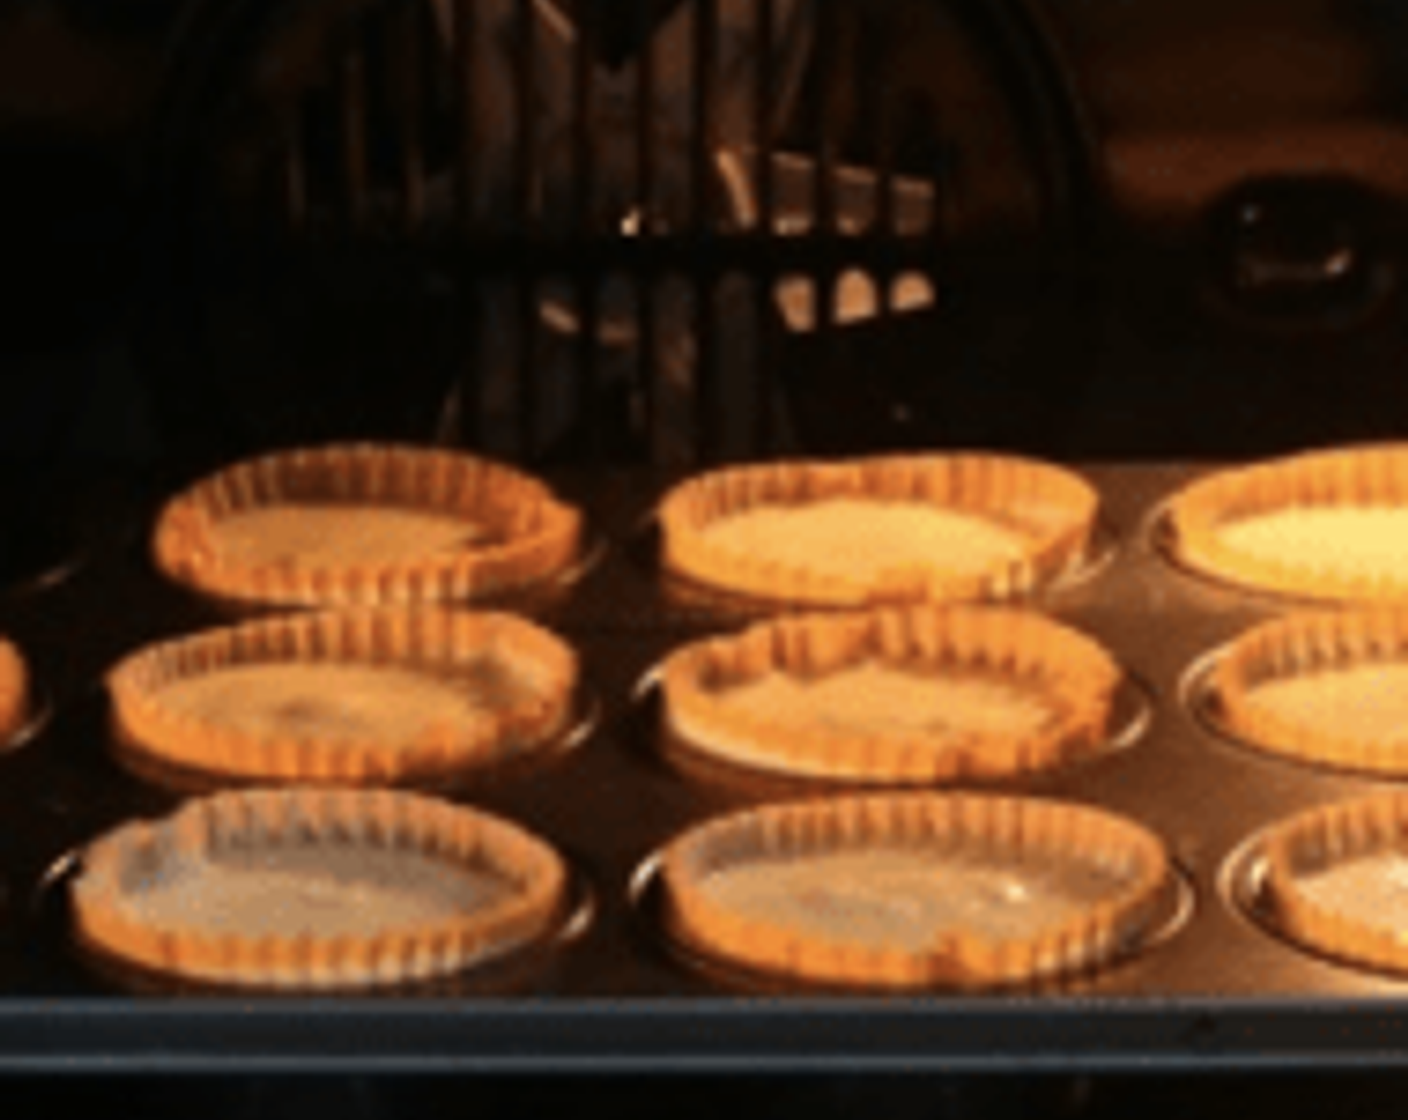 step 8 Bake in preheated oven for about 25-30 minutes. The cakes will puff up and shrink back a little during baking.